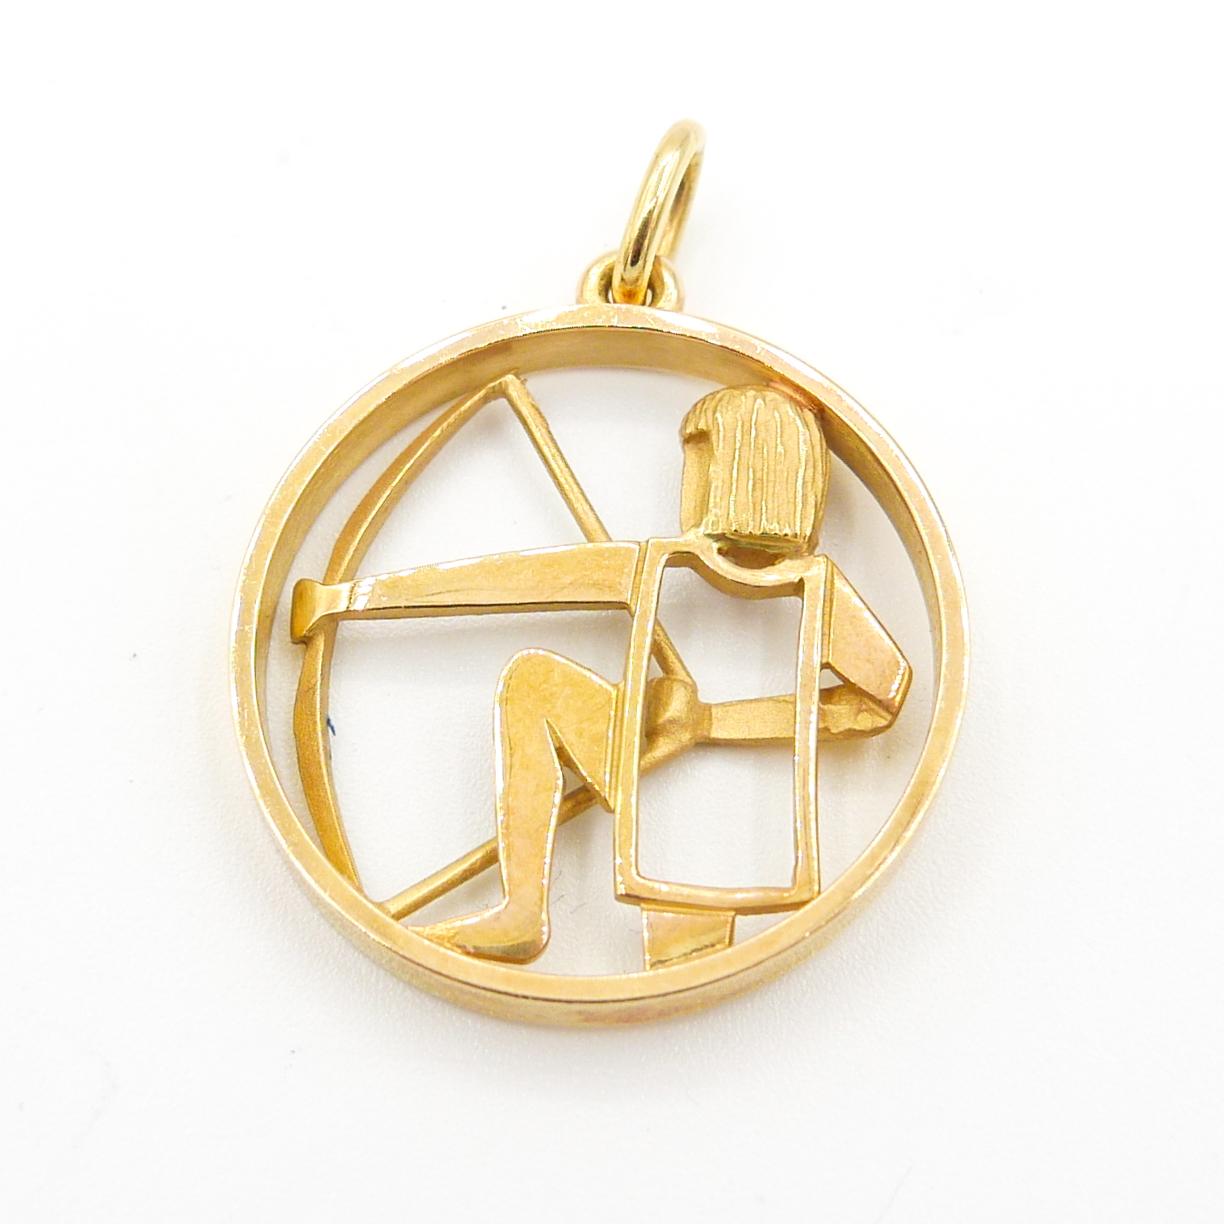 Güeblin 18 karat Yellow Gold Sagittarius Charm/Pendant. 1 inch in circumference and a 7.5mm bail. 

Chain not included.